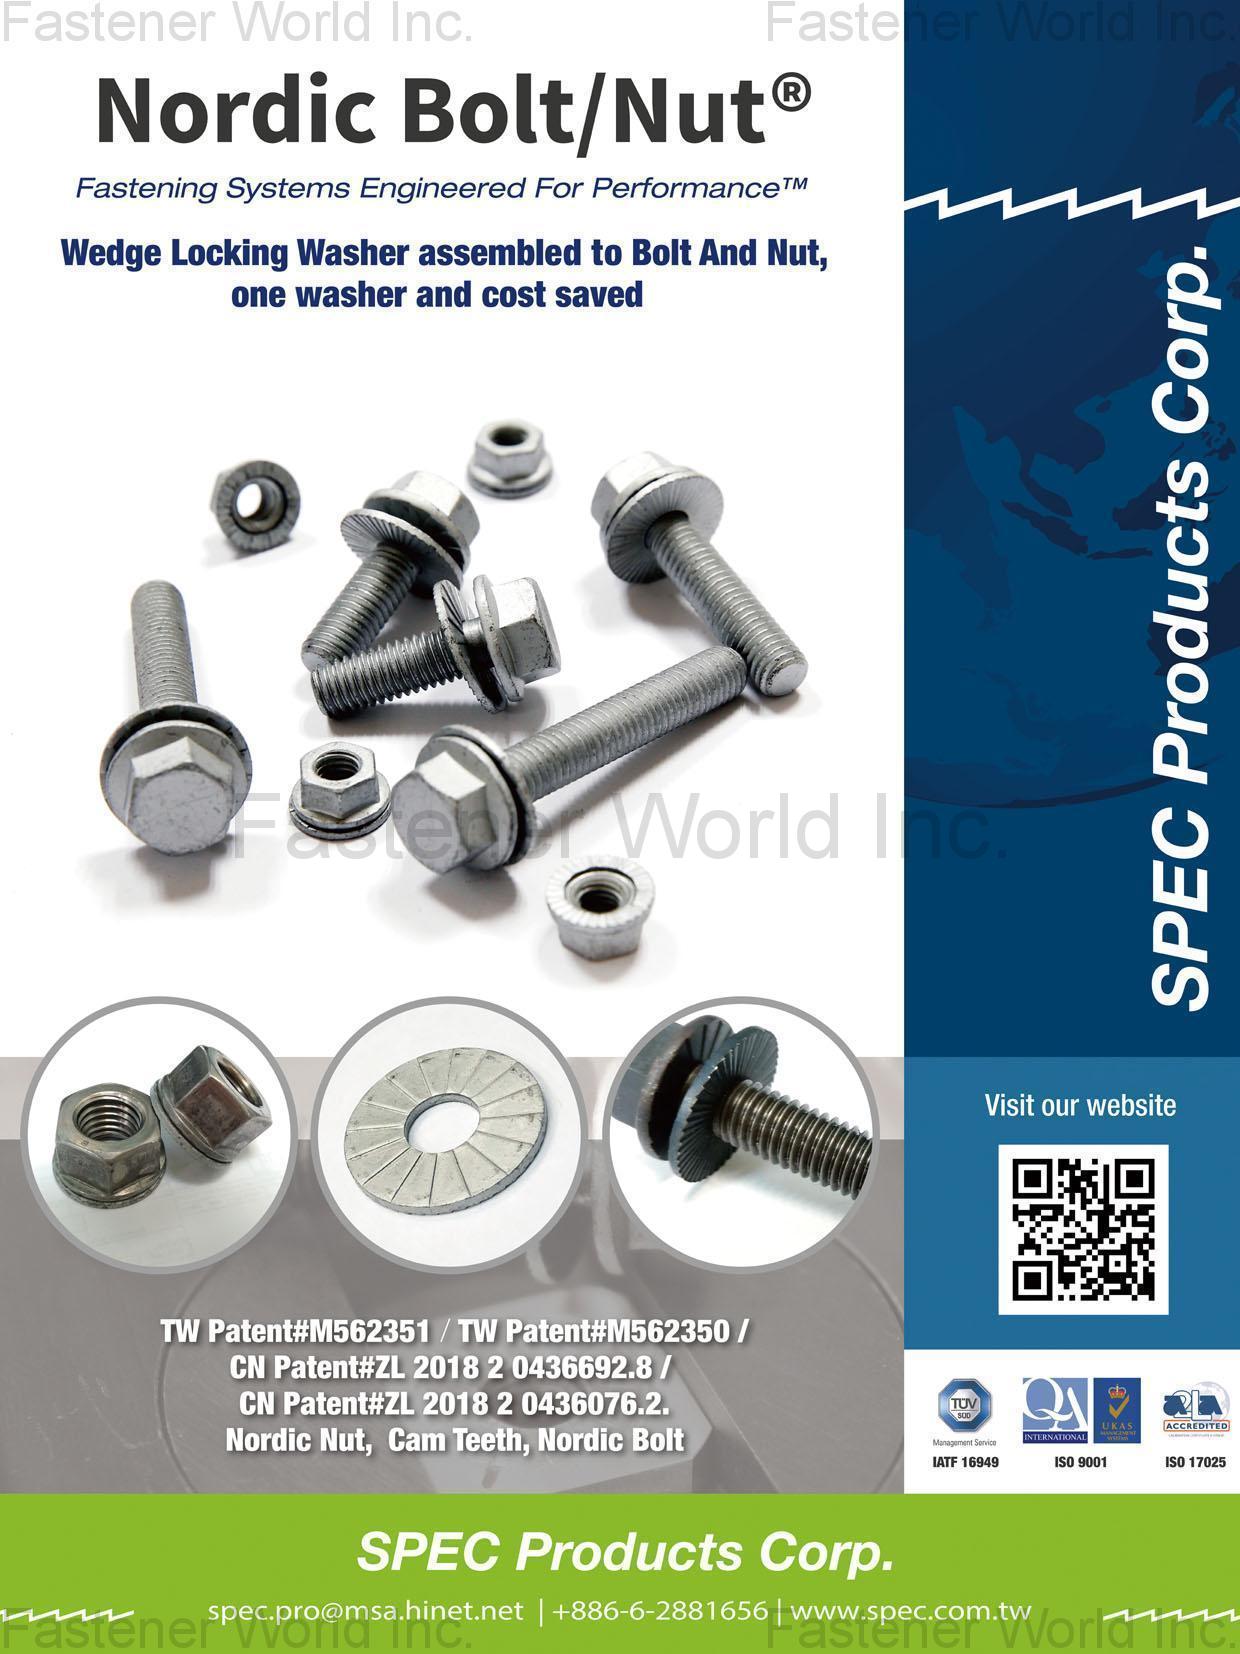 SPEC PRODUCTS CORP.  , Nordic Bolt/Nut, Wedge Locking Washer assembled to Bolt and Nut , Special Parts